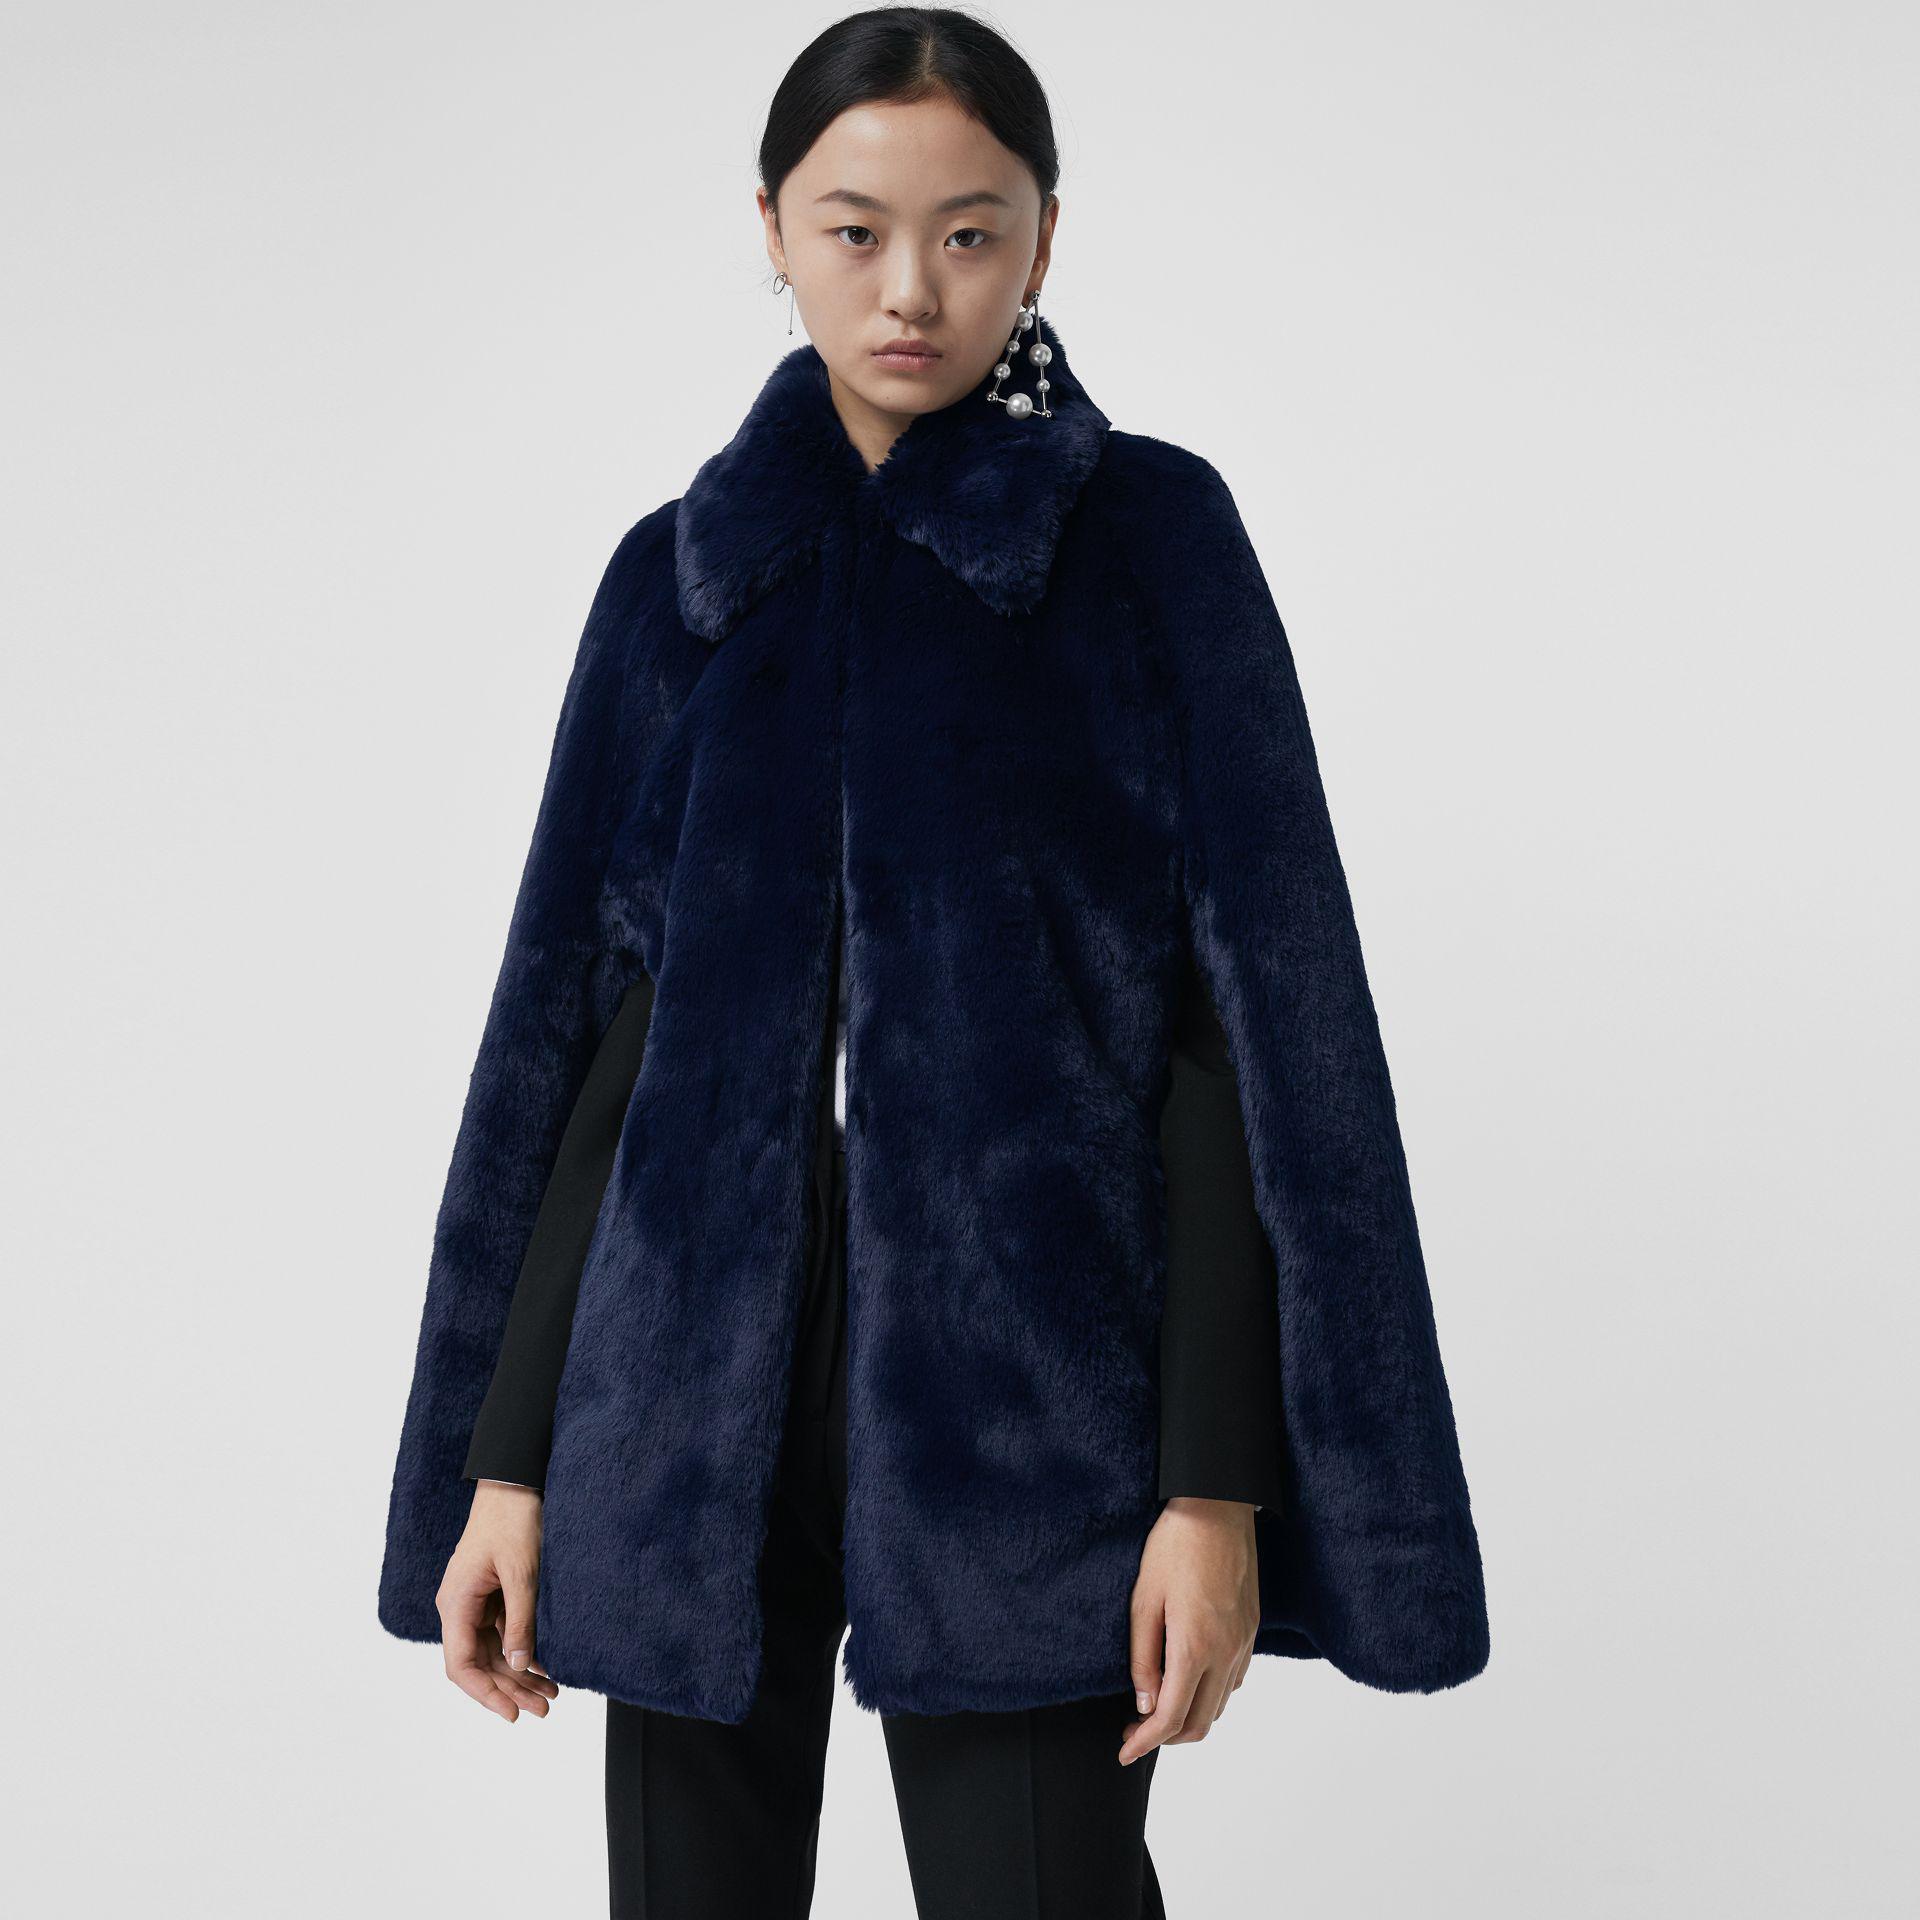 Burberry Faux Fur Cape in Navy (Blue 